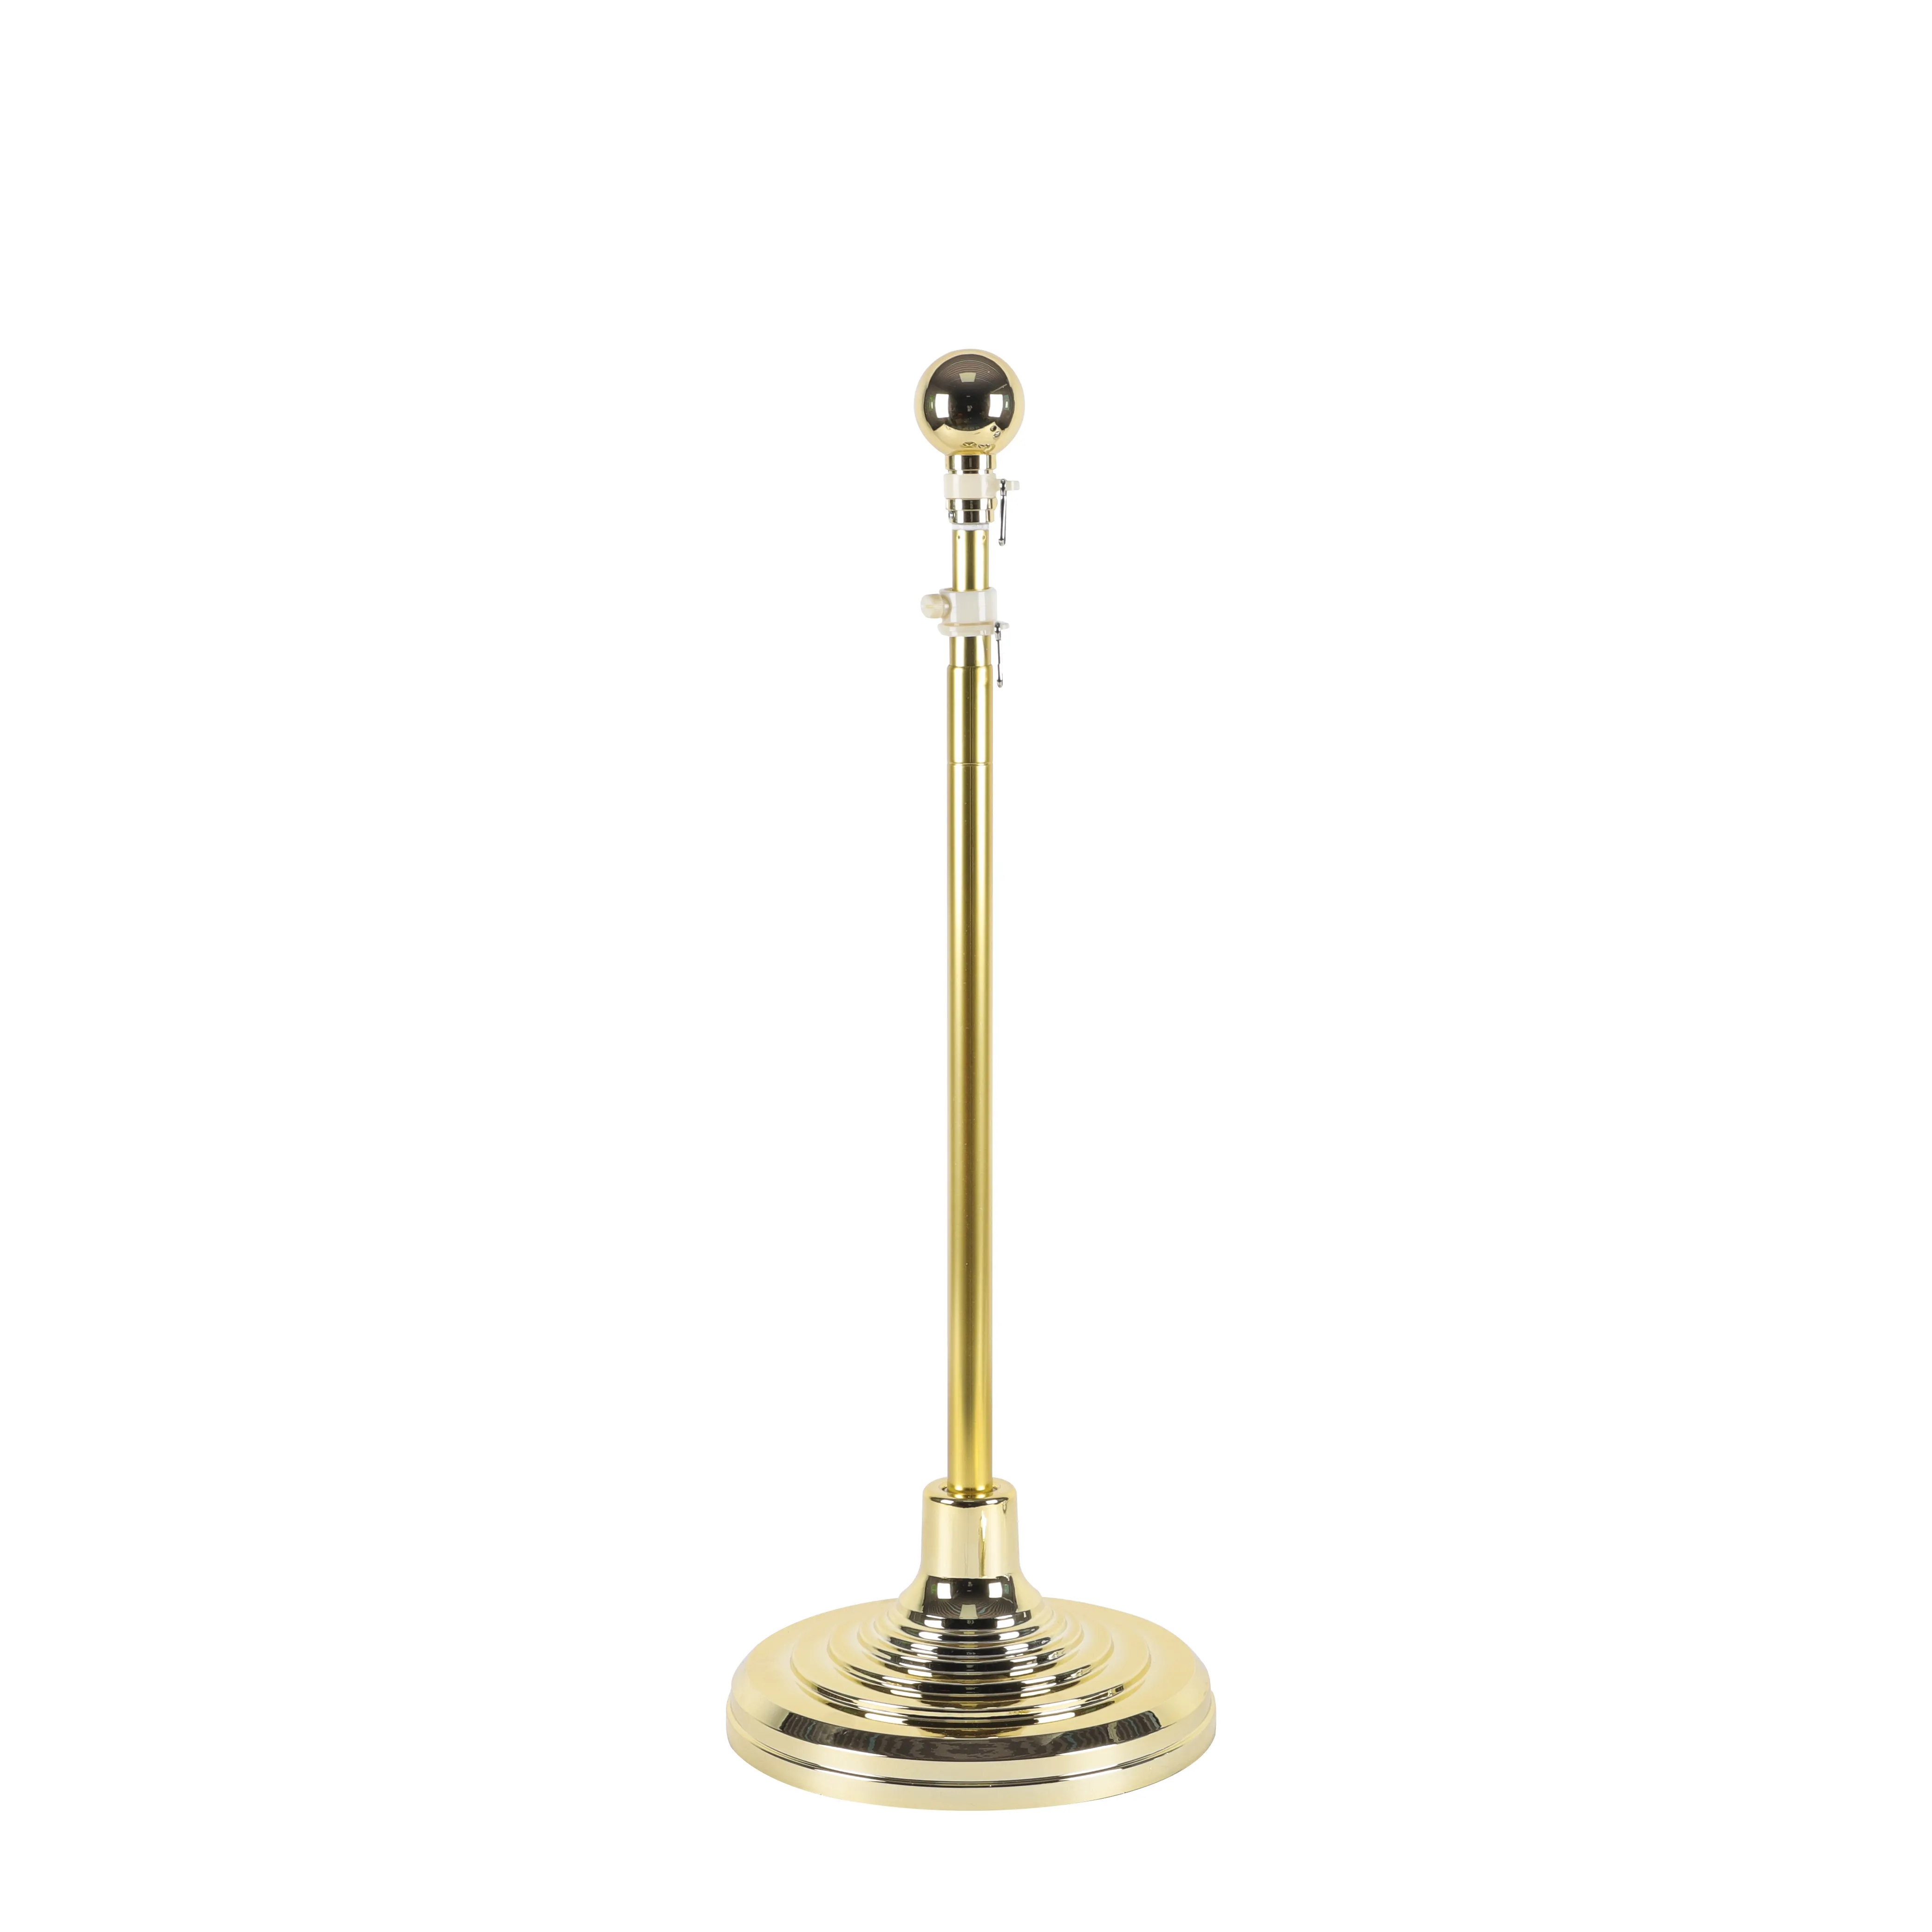 Base Stand for Indoor Flagpole  Gold Interior Flag Holder Stands for Pole Compatible Prefect for Classroom  Churches  Meeting